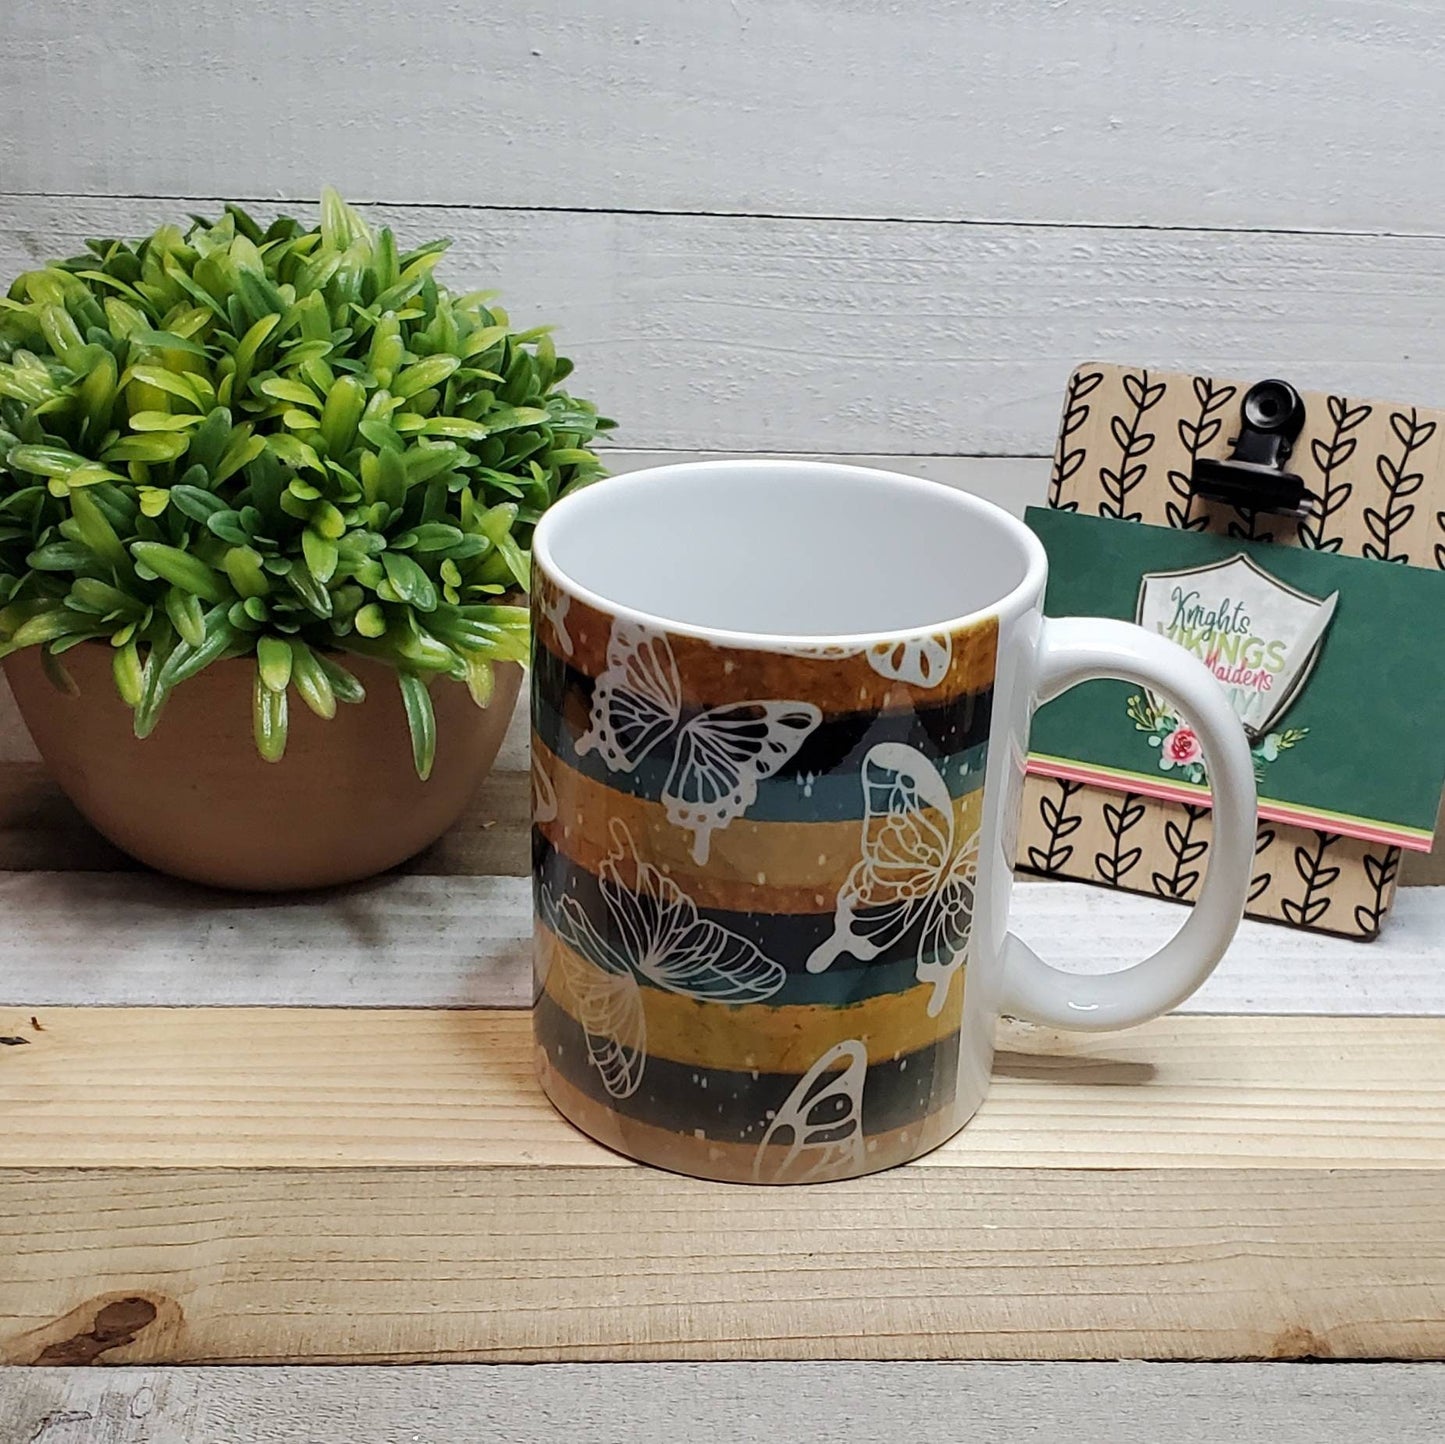 Anti Social Butterfly in Fall Colors, Your Choice in Mug Color and Size, Anti People, Coffee Lover, Coffee Mug, Gift for Friends